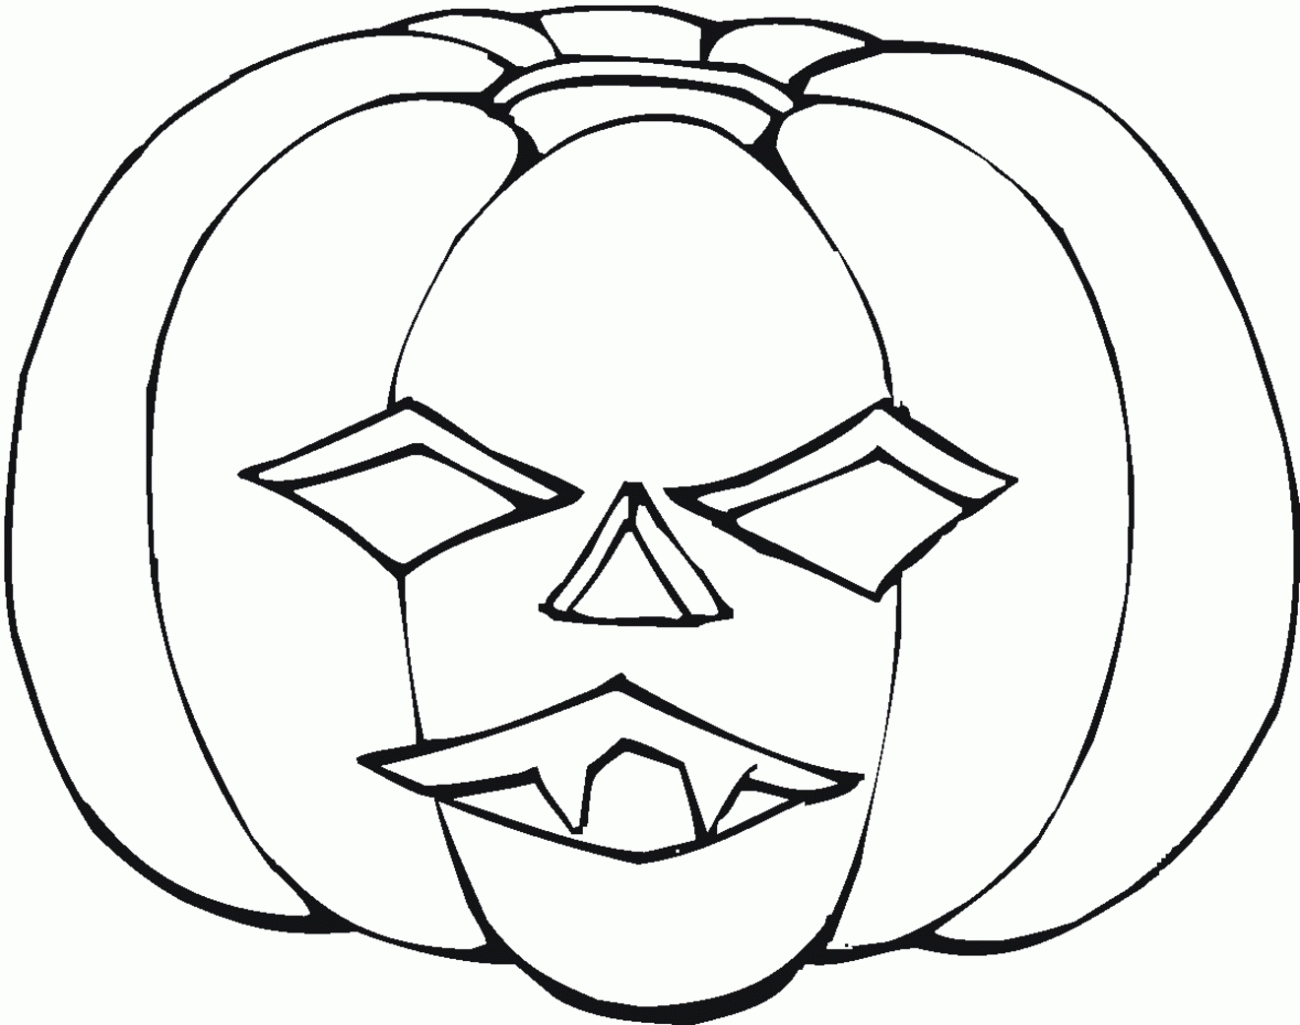 Halloween Pumpkin Coloring Pages Printables Free Printable Pumpkin Coloring Pages For Kids